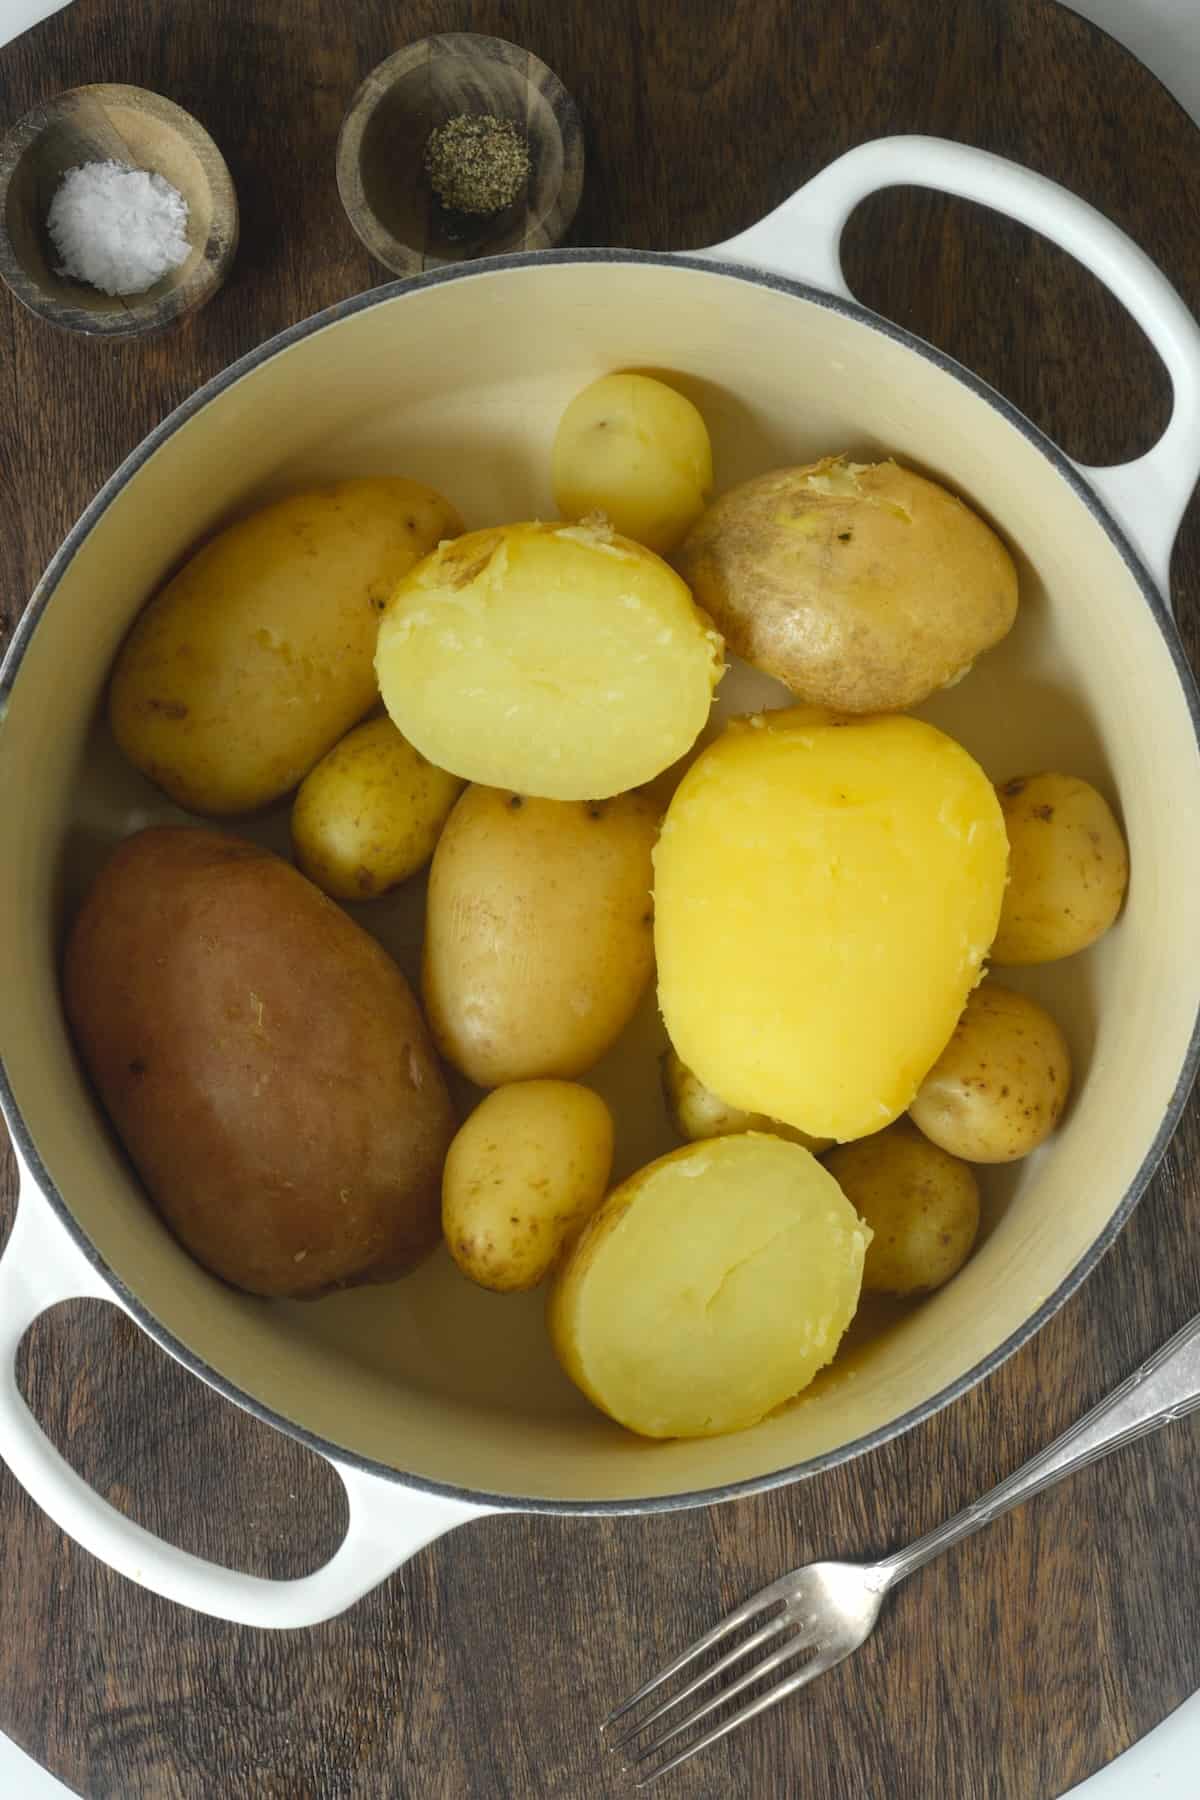 Thuisland Gelach Echt niet How to Boil Potatoes That Are Whole or Cubed - Alphafoodie